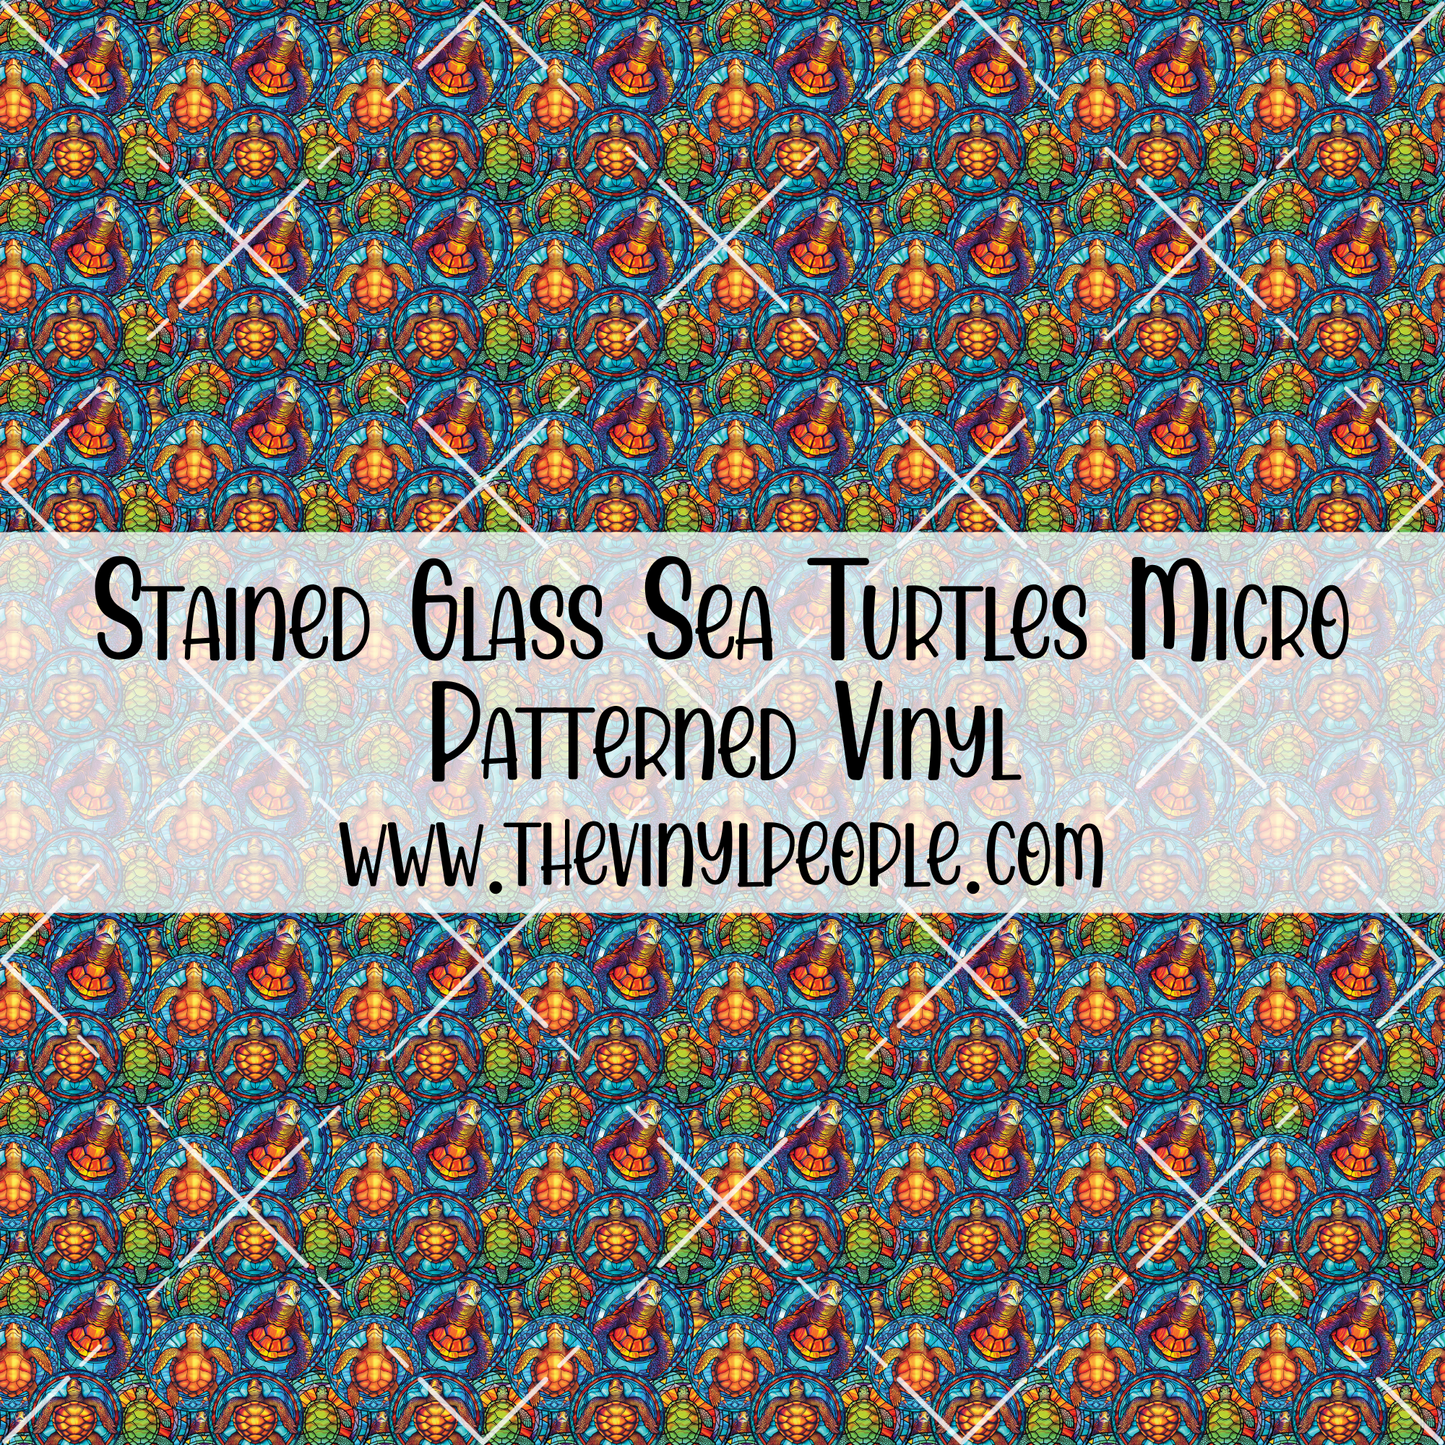 Stained Glass Sea Turtles Patterned Vinyl